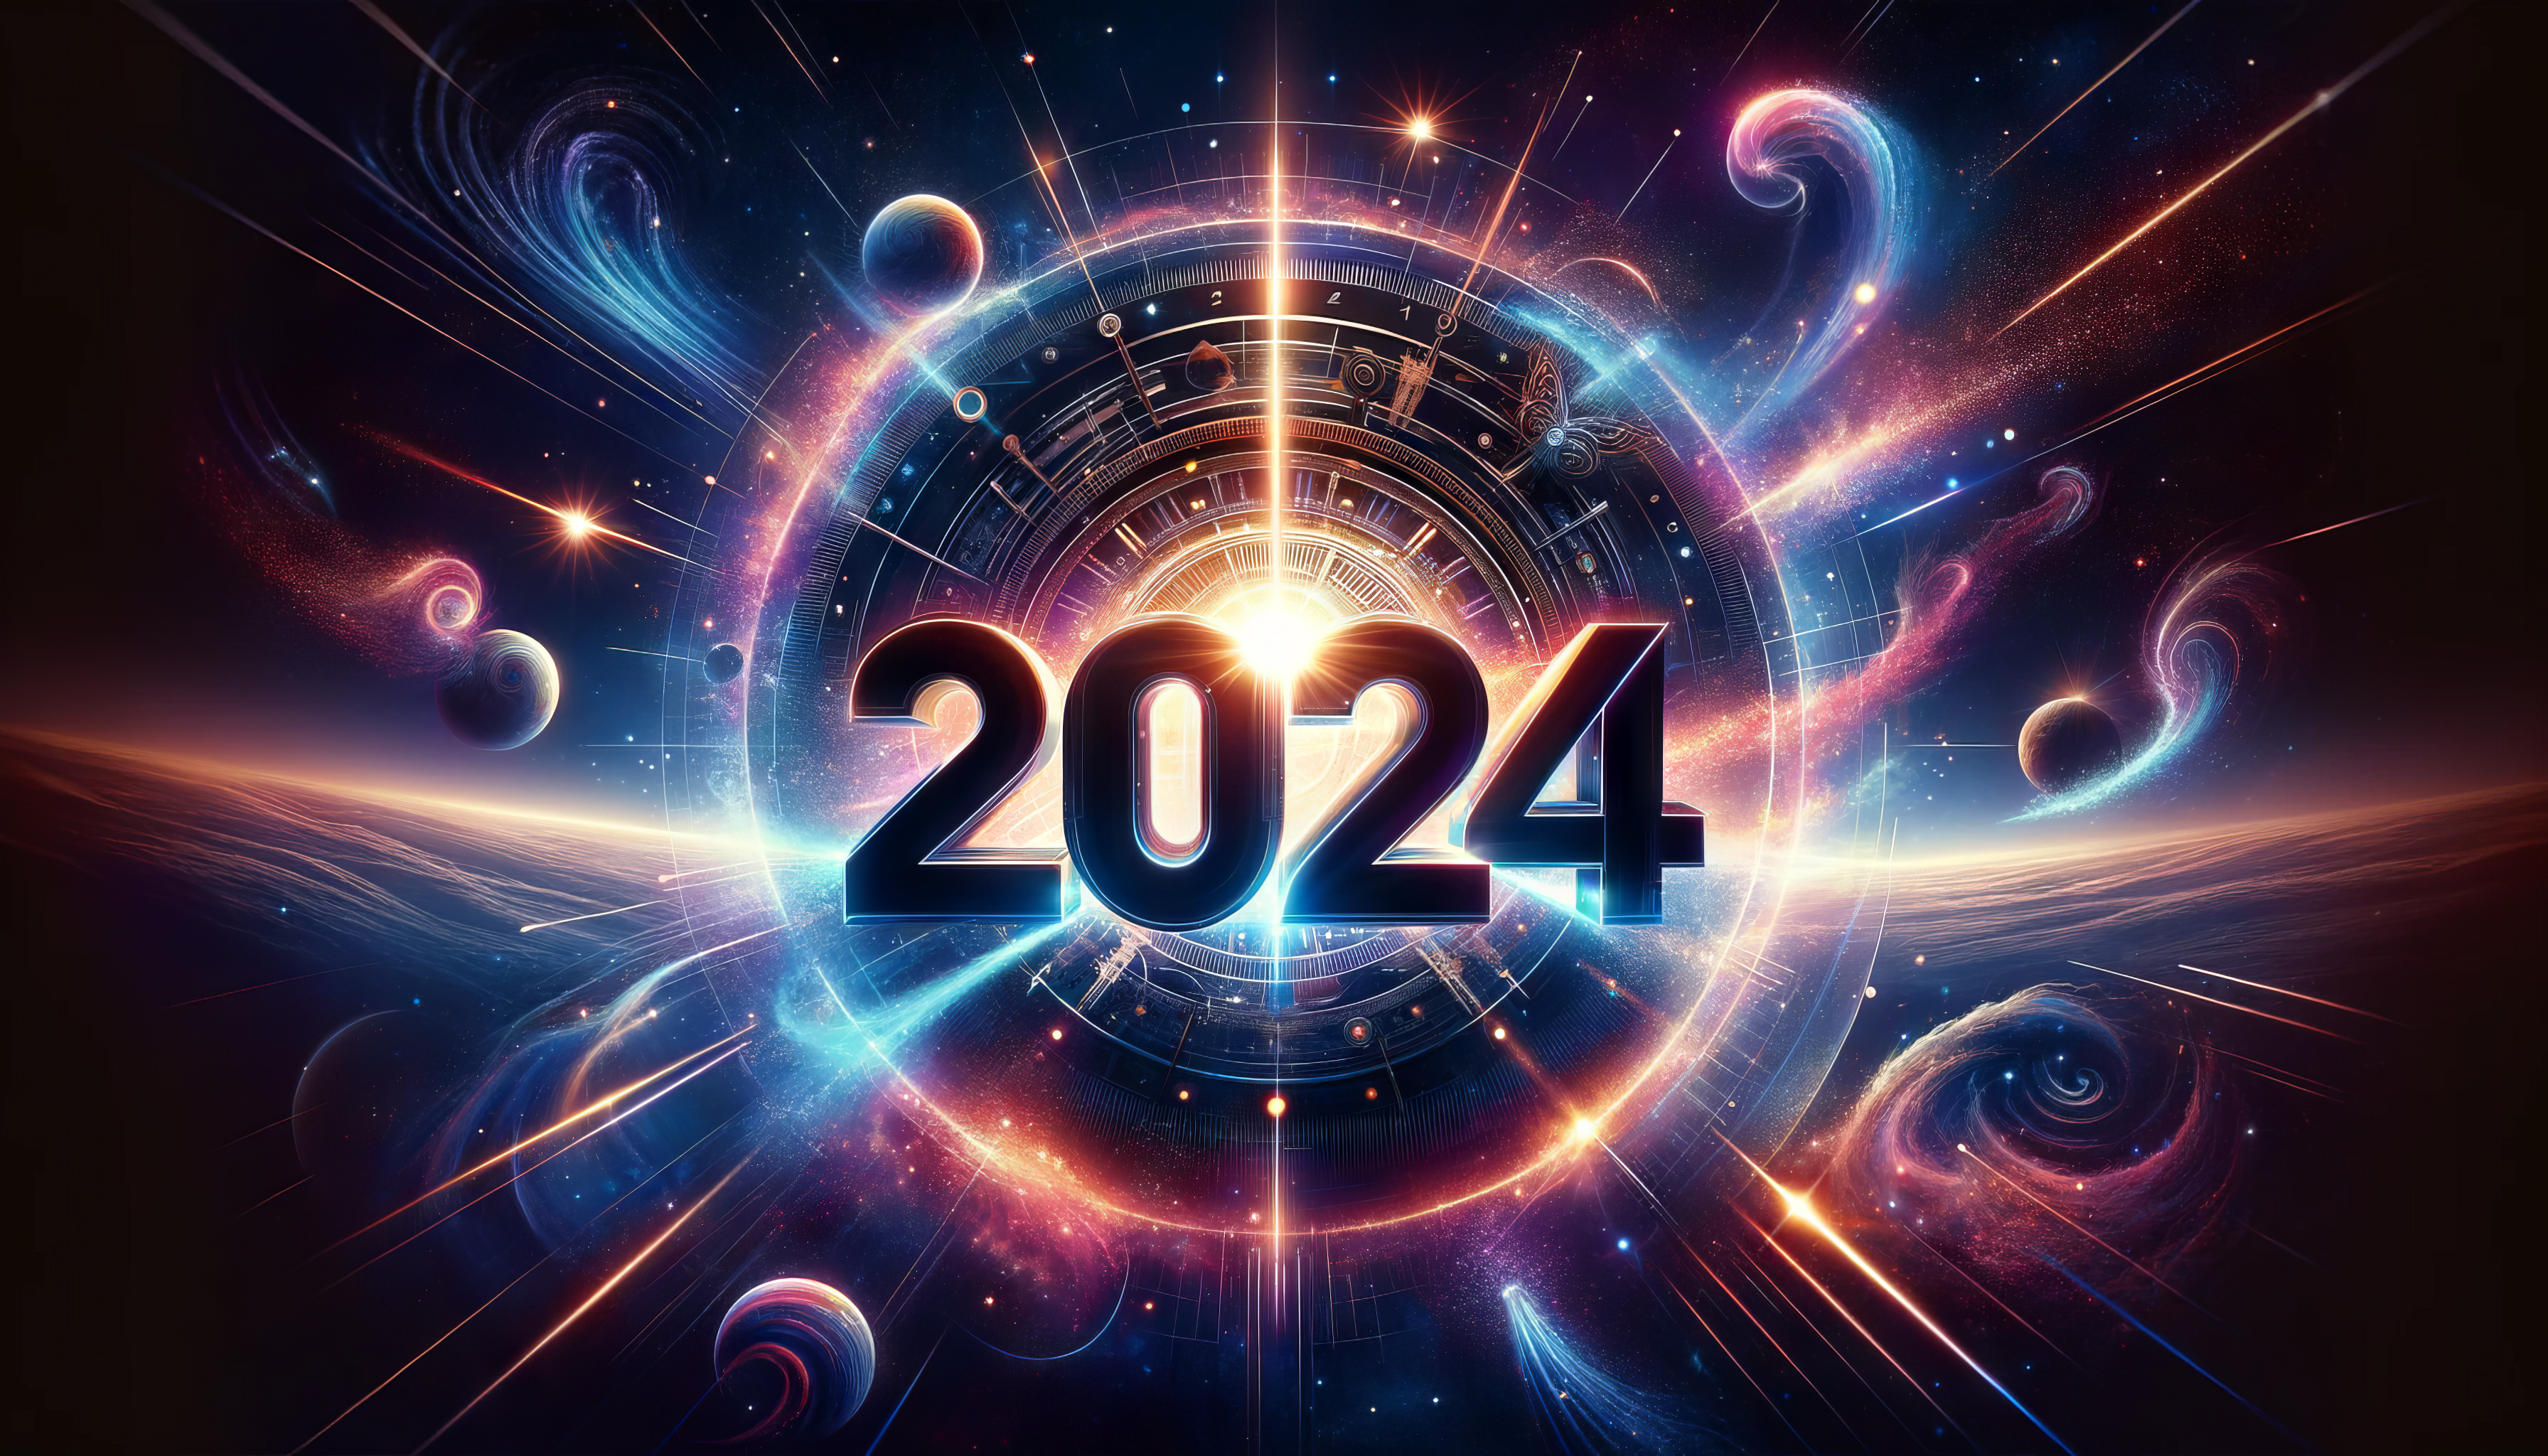 HD wallpaper featuring futuristic 2024 design with cosmic and technological elements for desktop background.